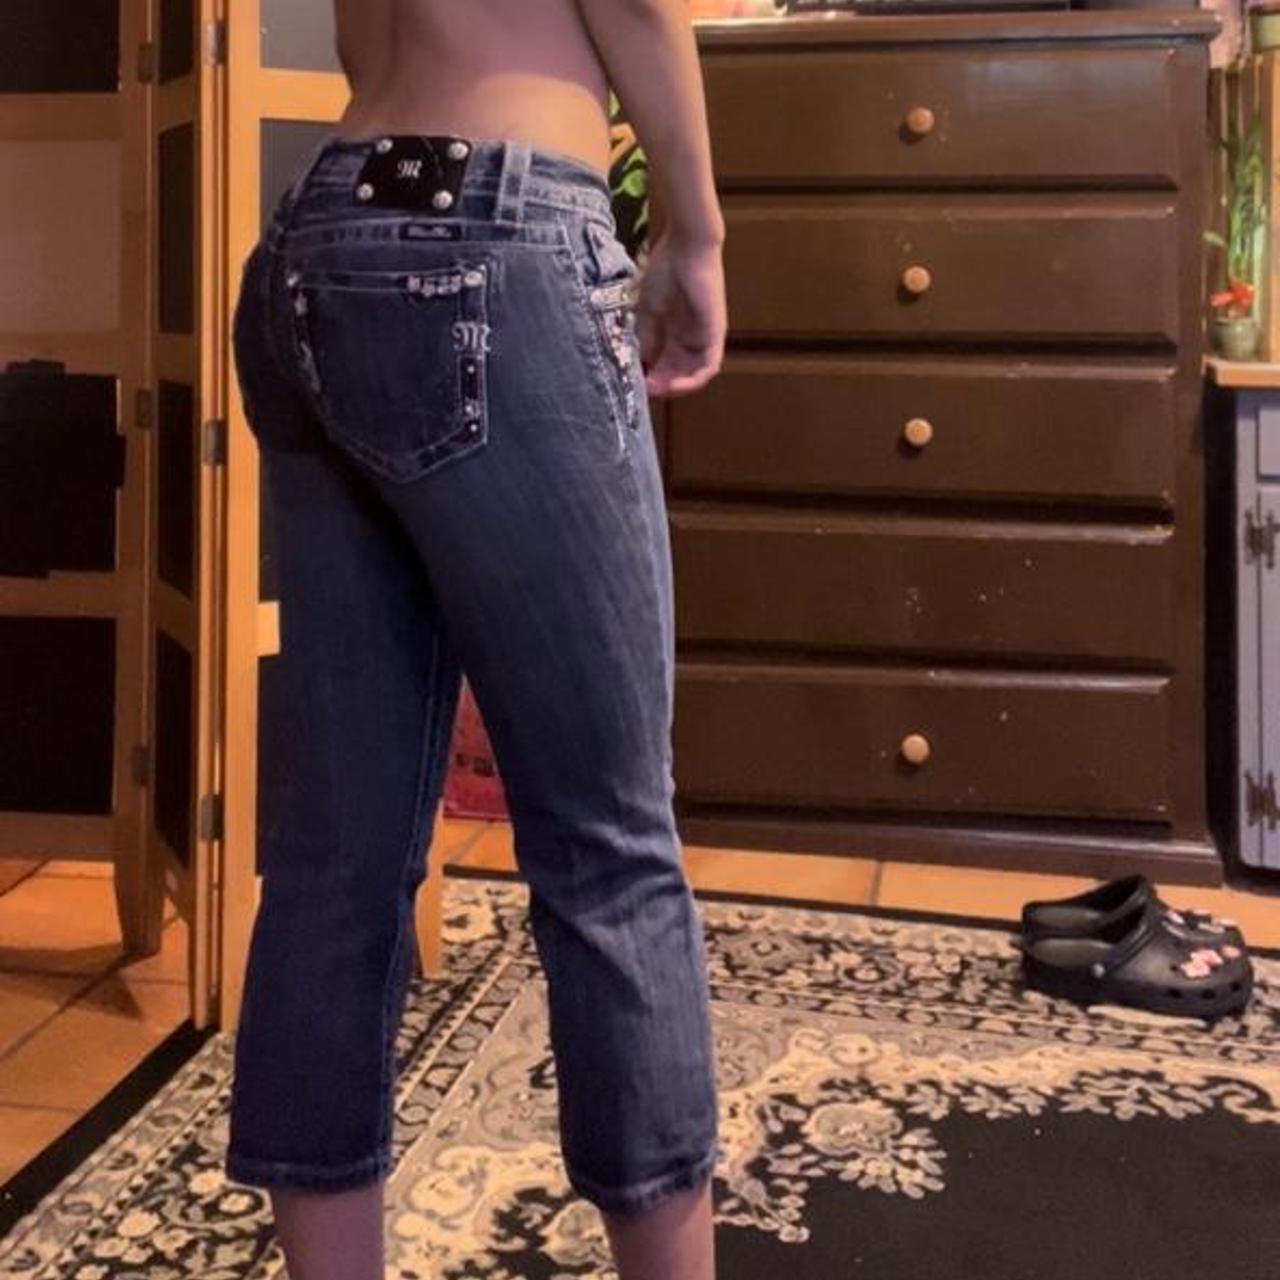 SEXY MISS ME CAPRIS JEANS WITH BEDAZZLES AND... - Depop